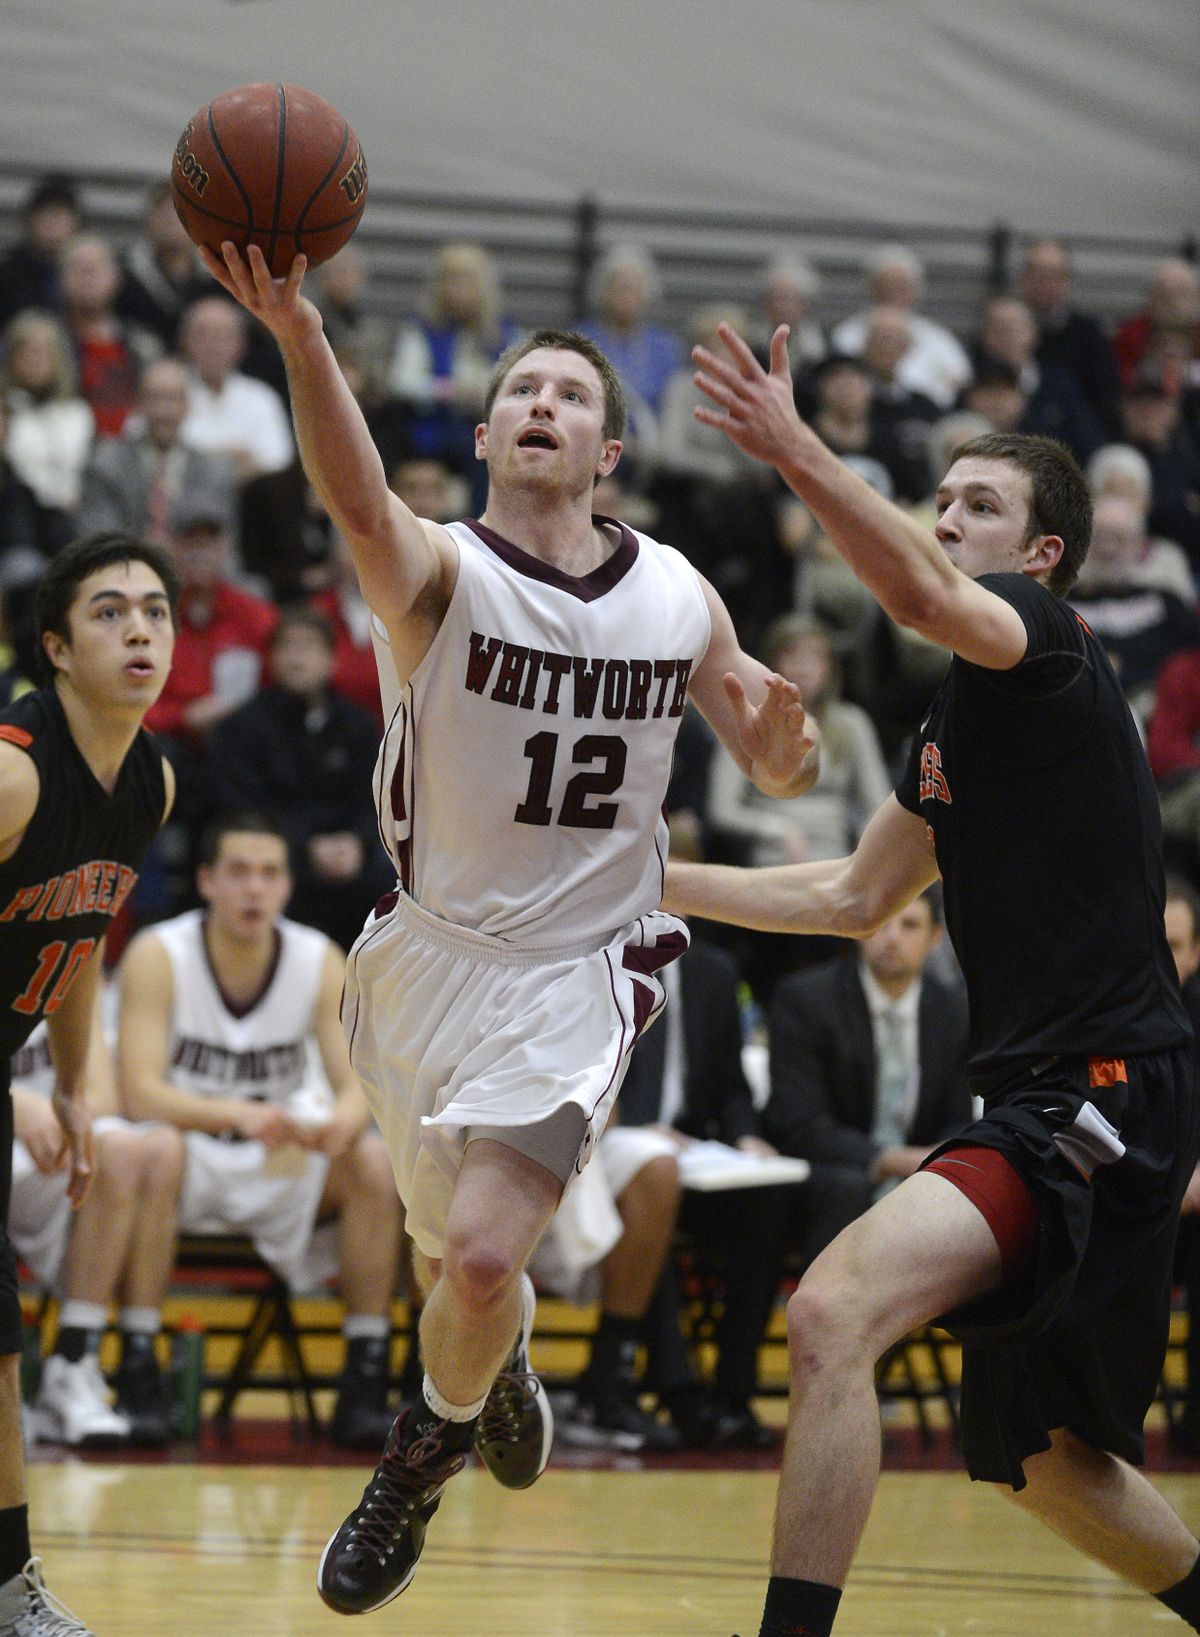 Whitworth’s Wade Gebbers lays in the ball to score two of his 22 points in the Pirates’ victory. (Colin Mulvany)